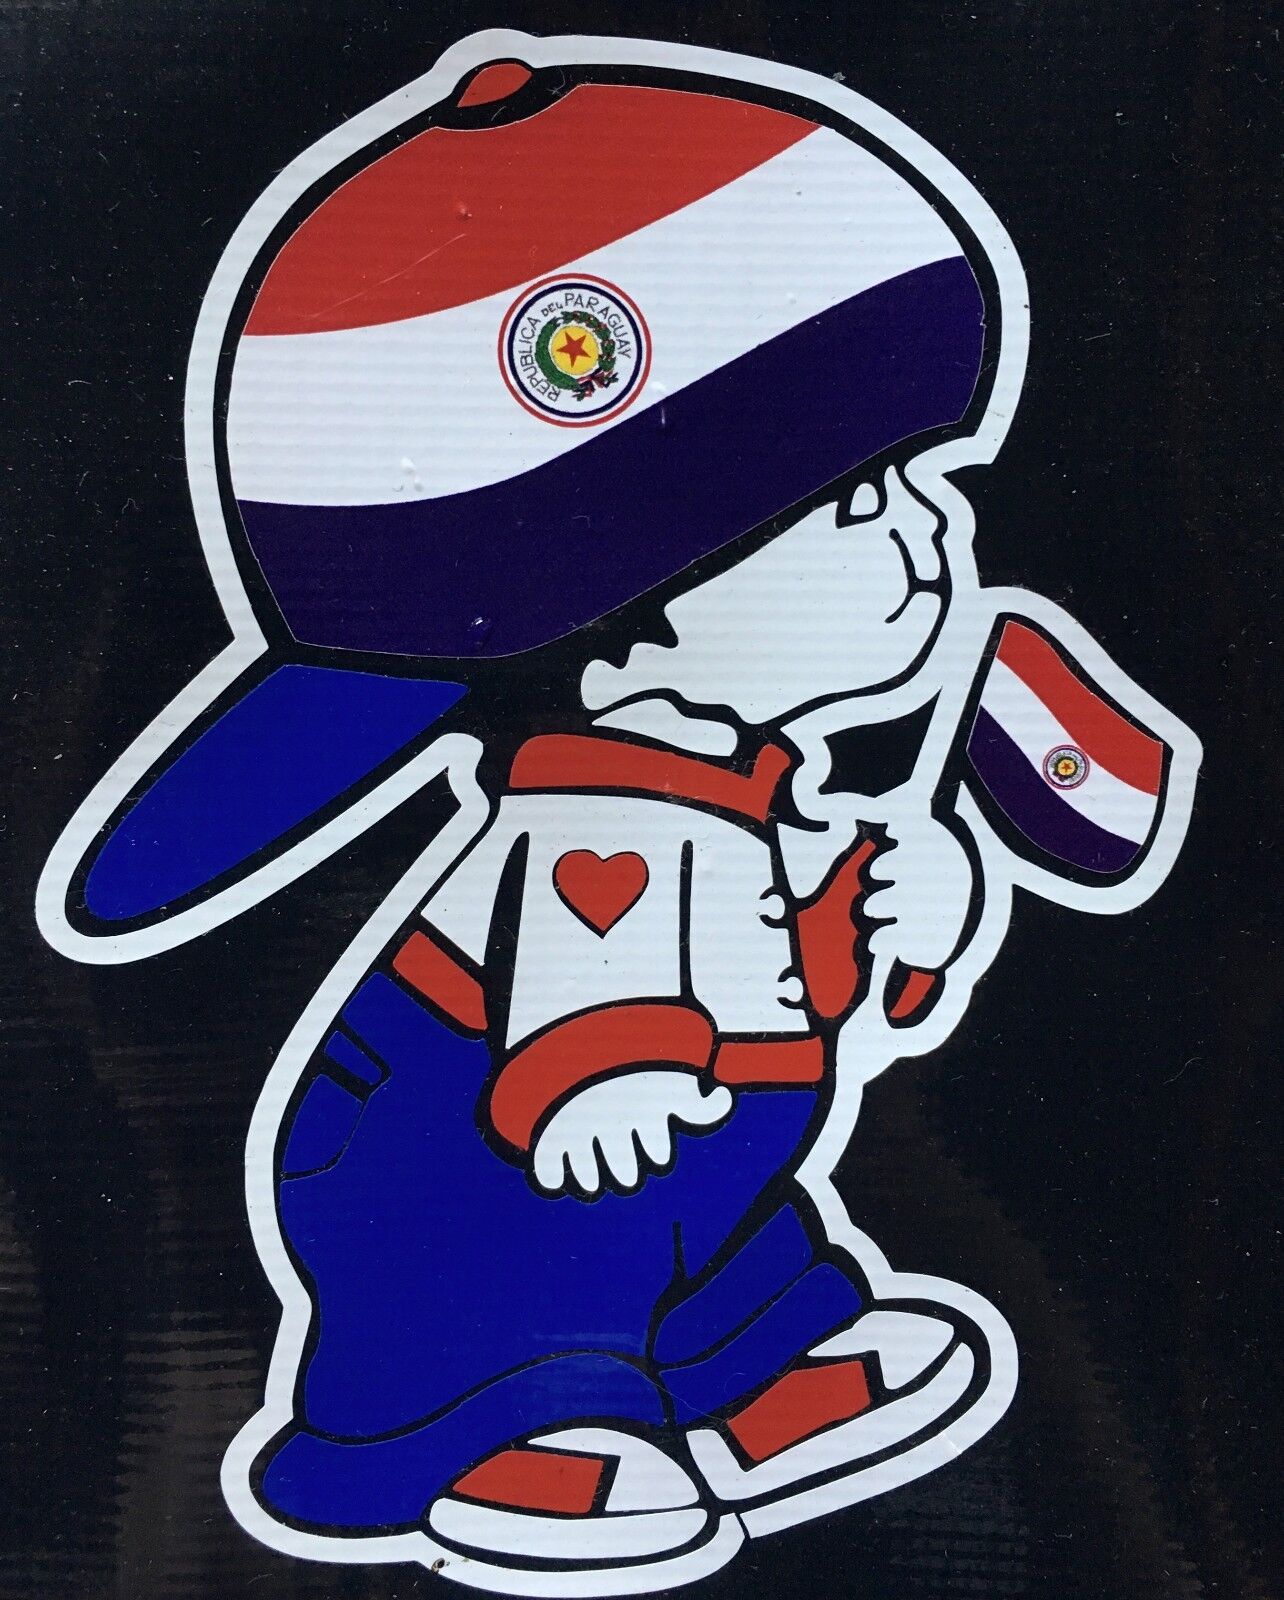 Paraguay Boy holding Paraguay National Flag Car Decal Sticker  